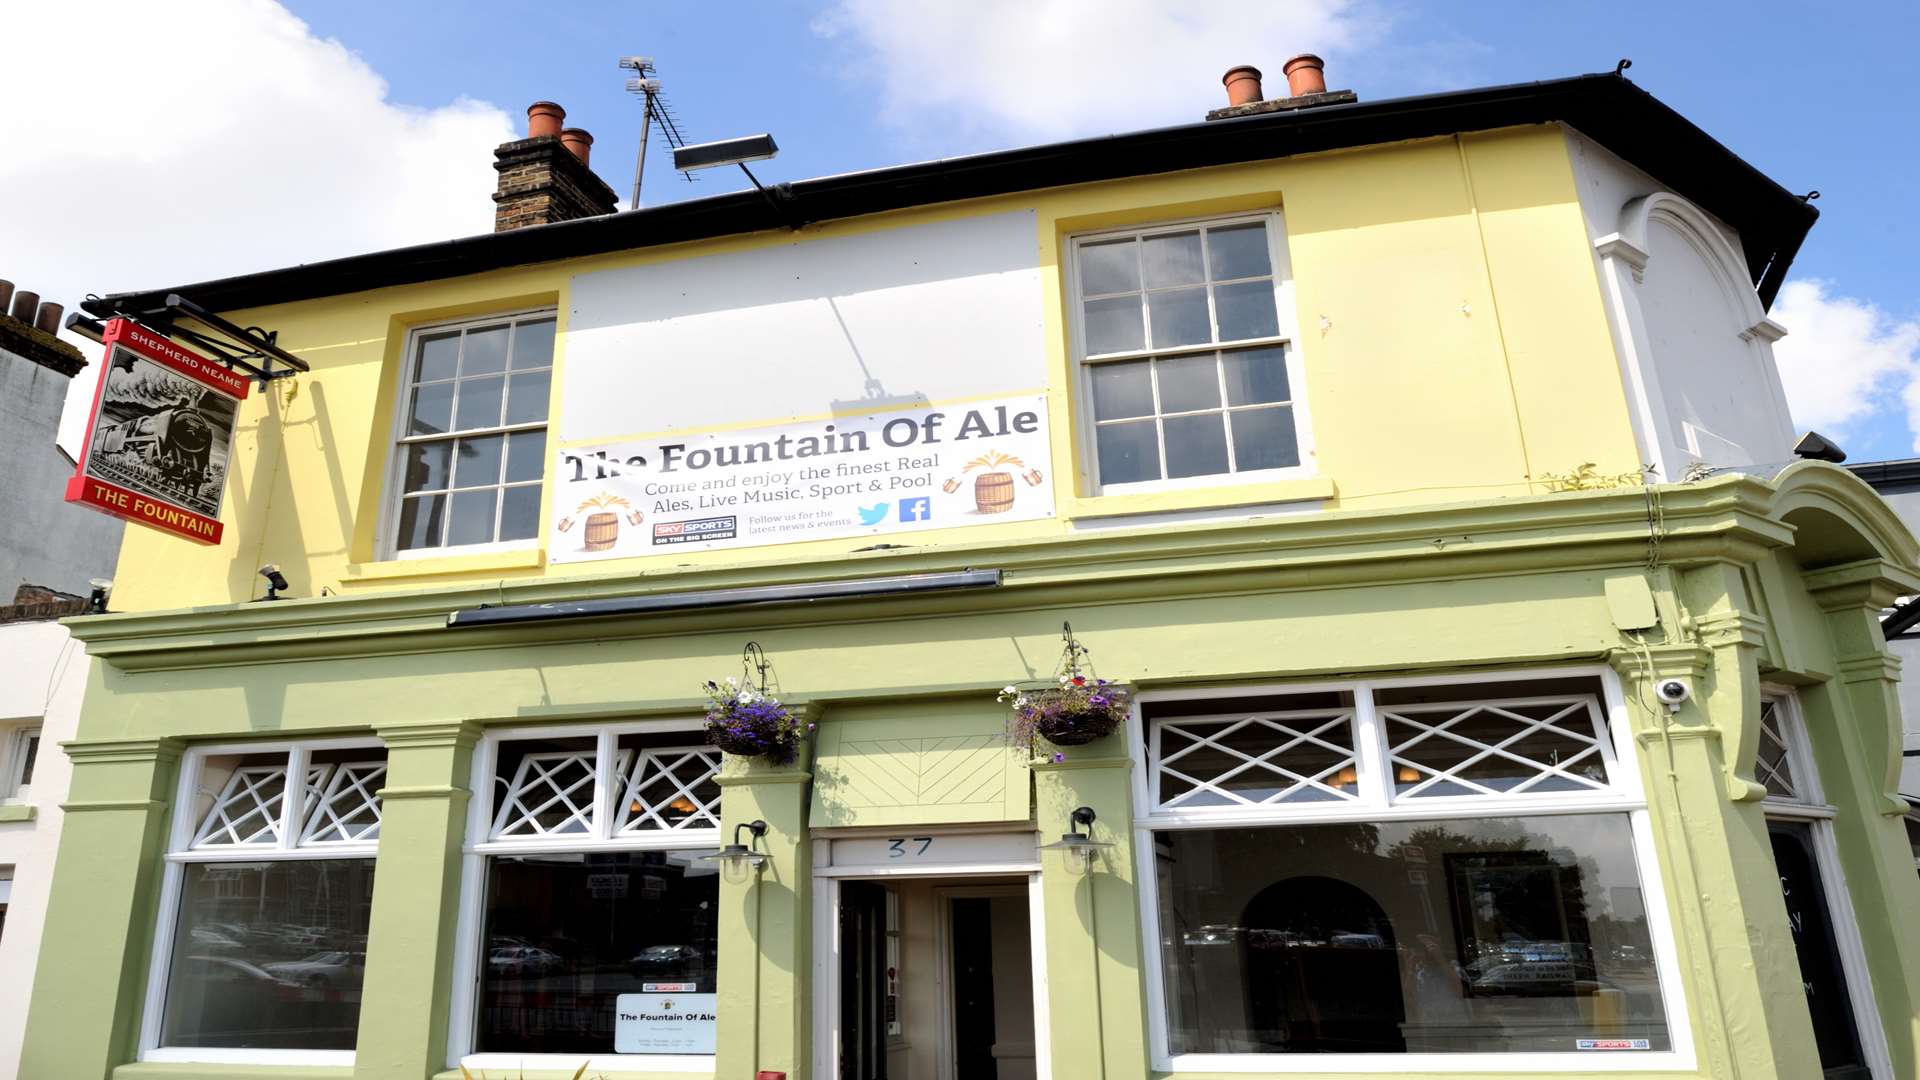 The former Fountain pub in Sittingbourne has been rebranded The Fountain of Ale